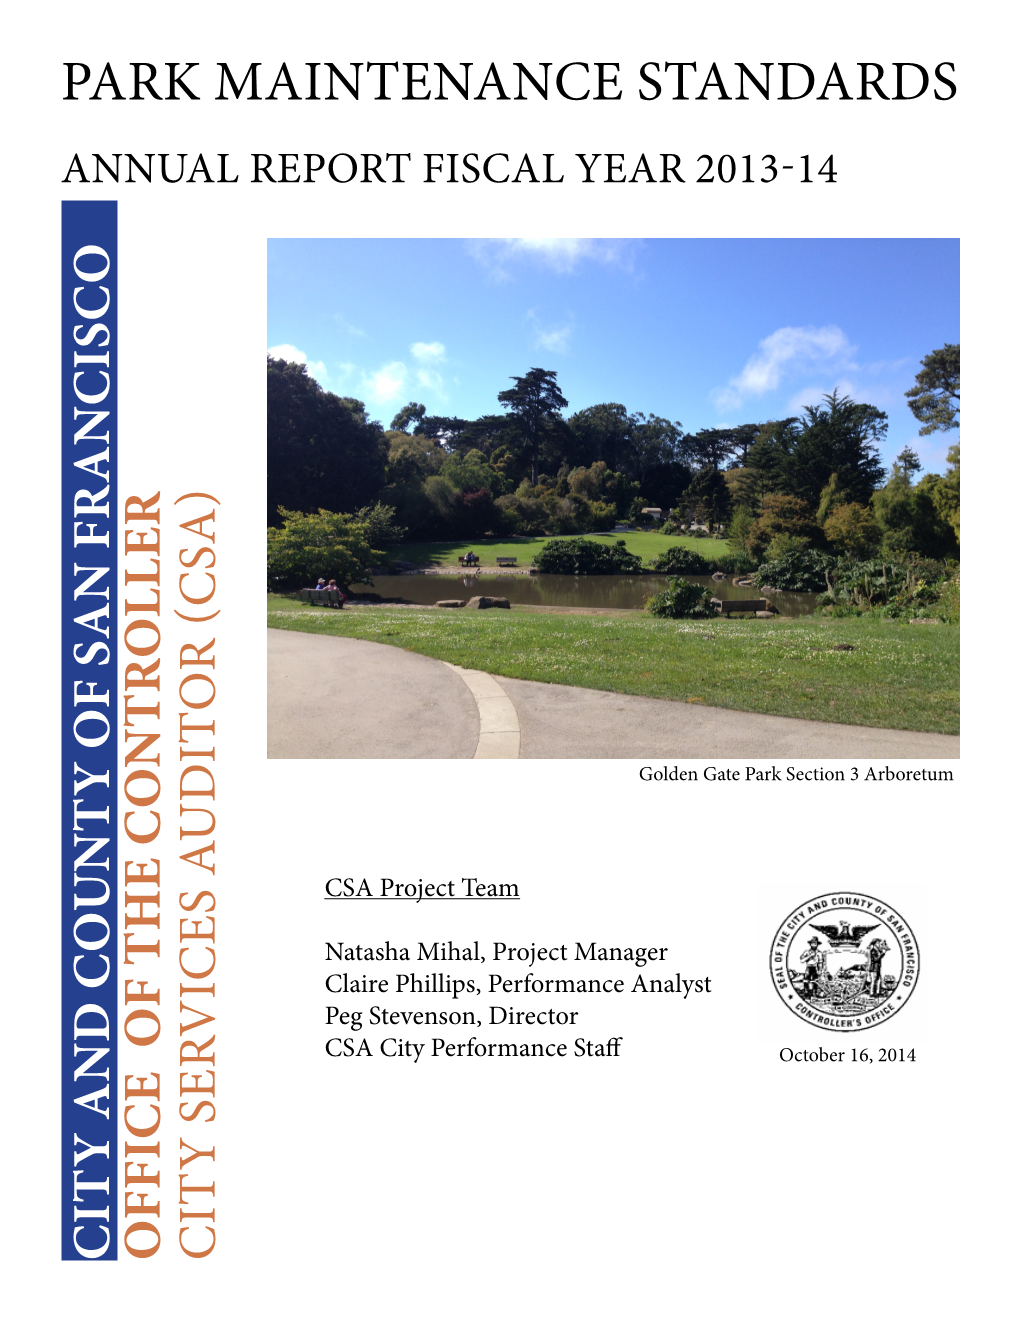 Park Maintenance Standards Annual Report FY 2013-14 Page 1